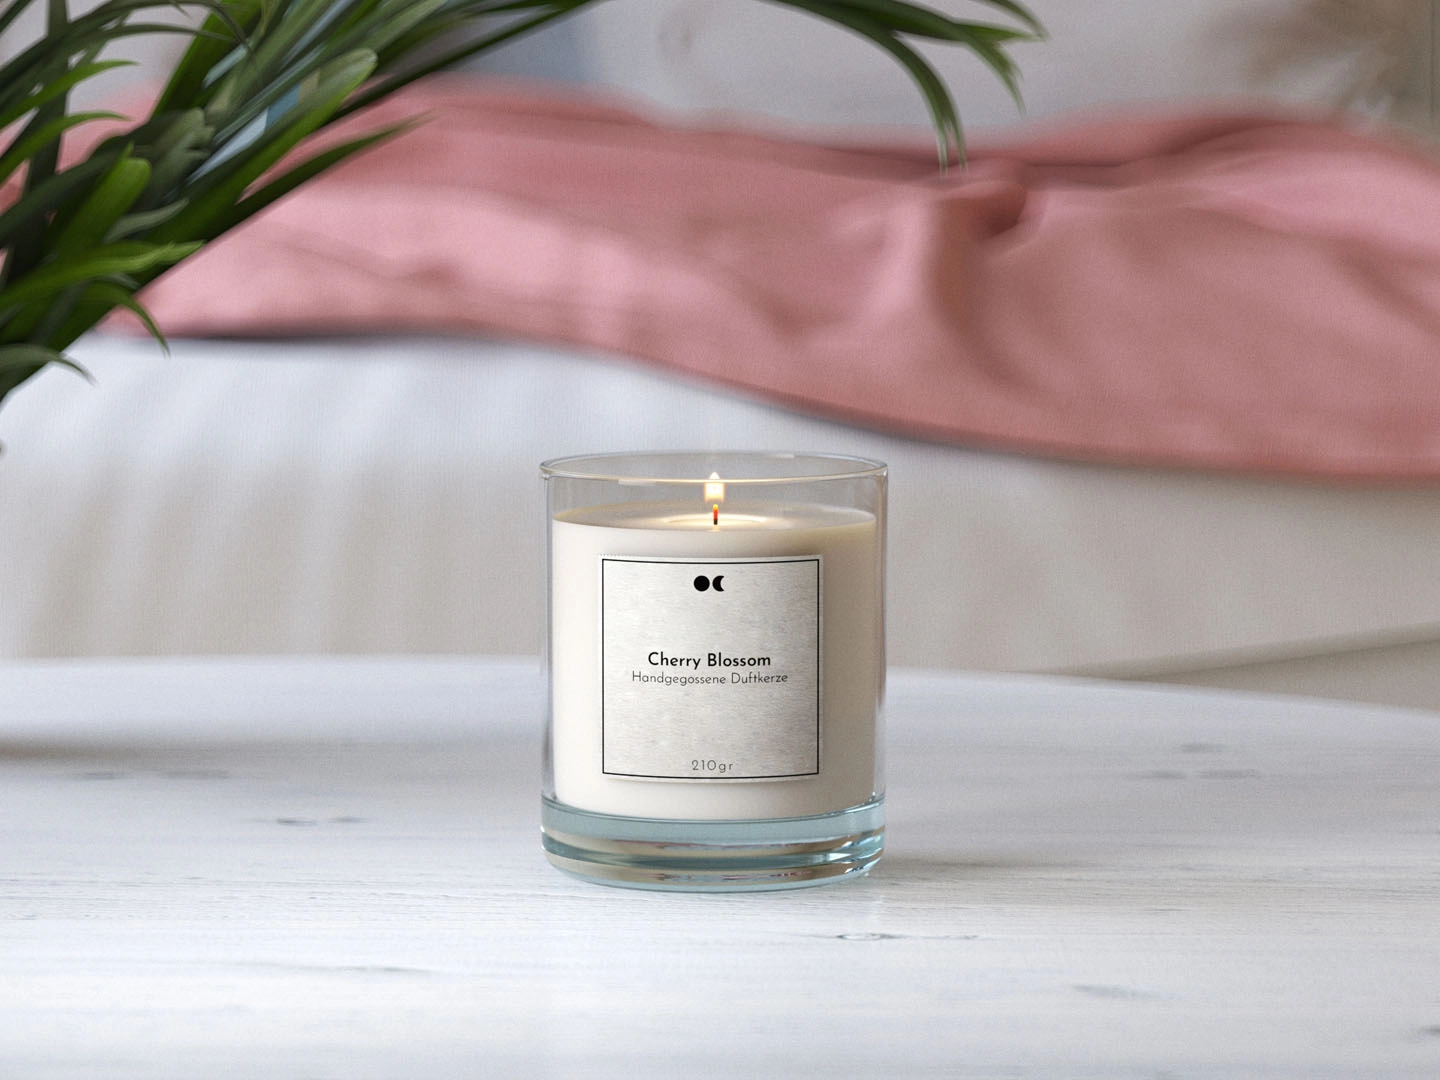 Scented candle in a jar – Cherry Blossom